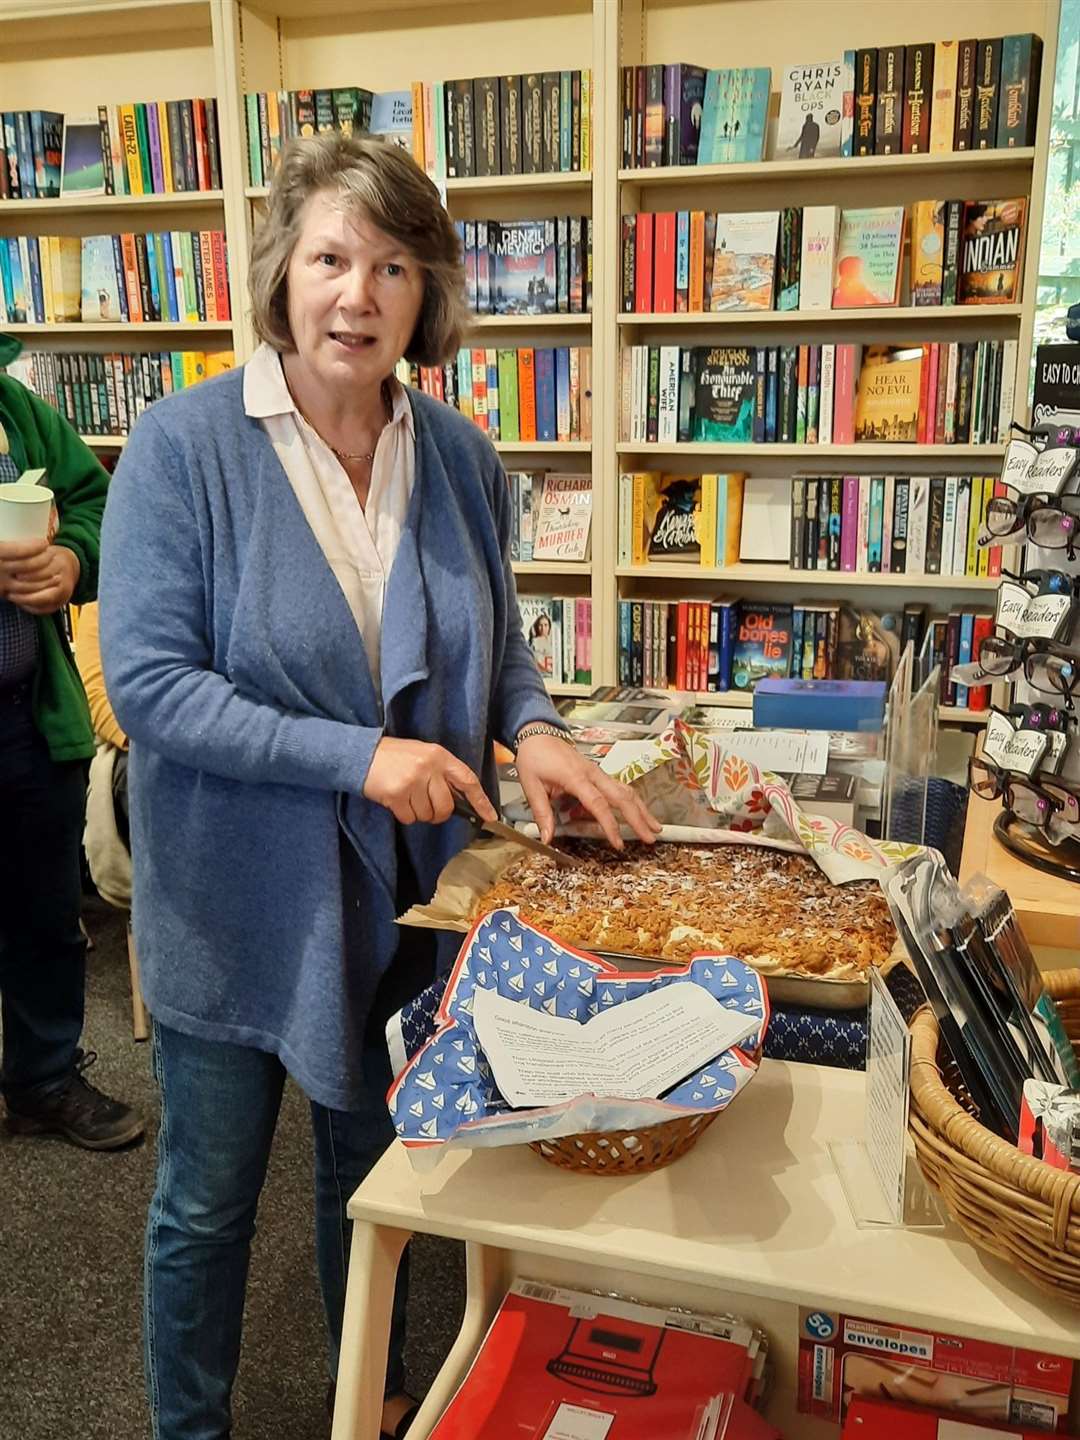 Tina Thomson cutting the birthday cake made by bookseller Izabela.